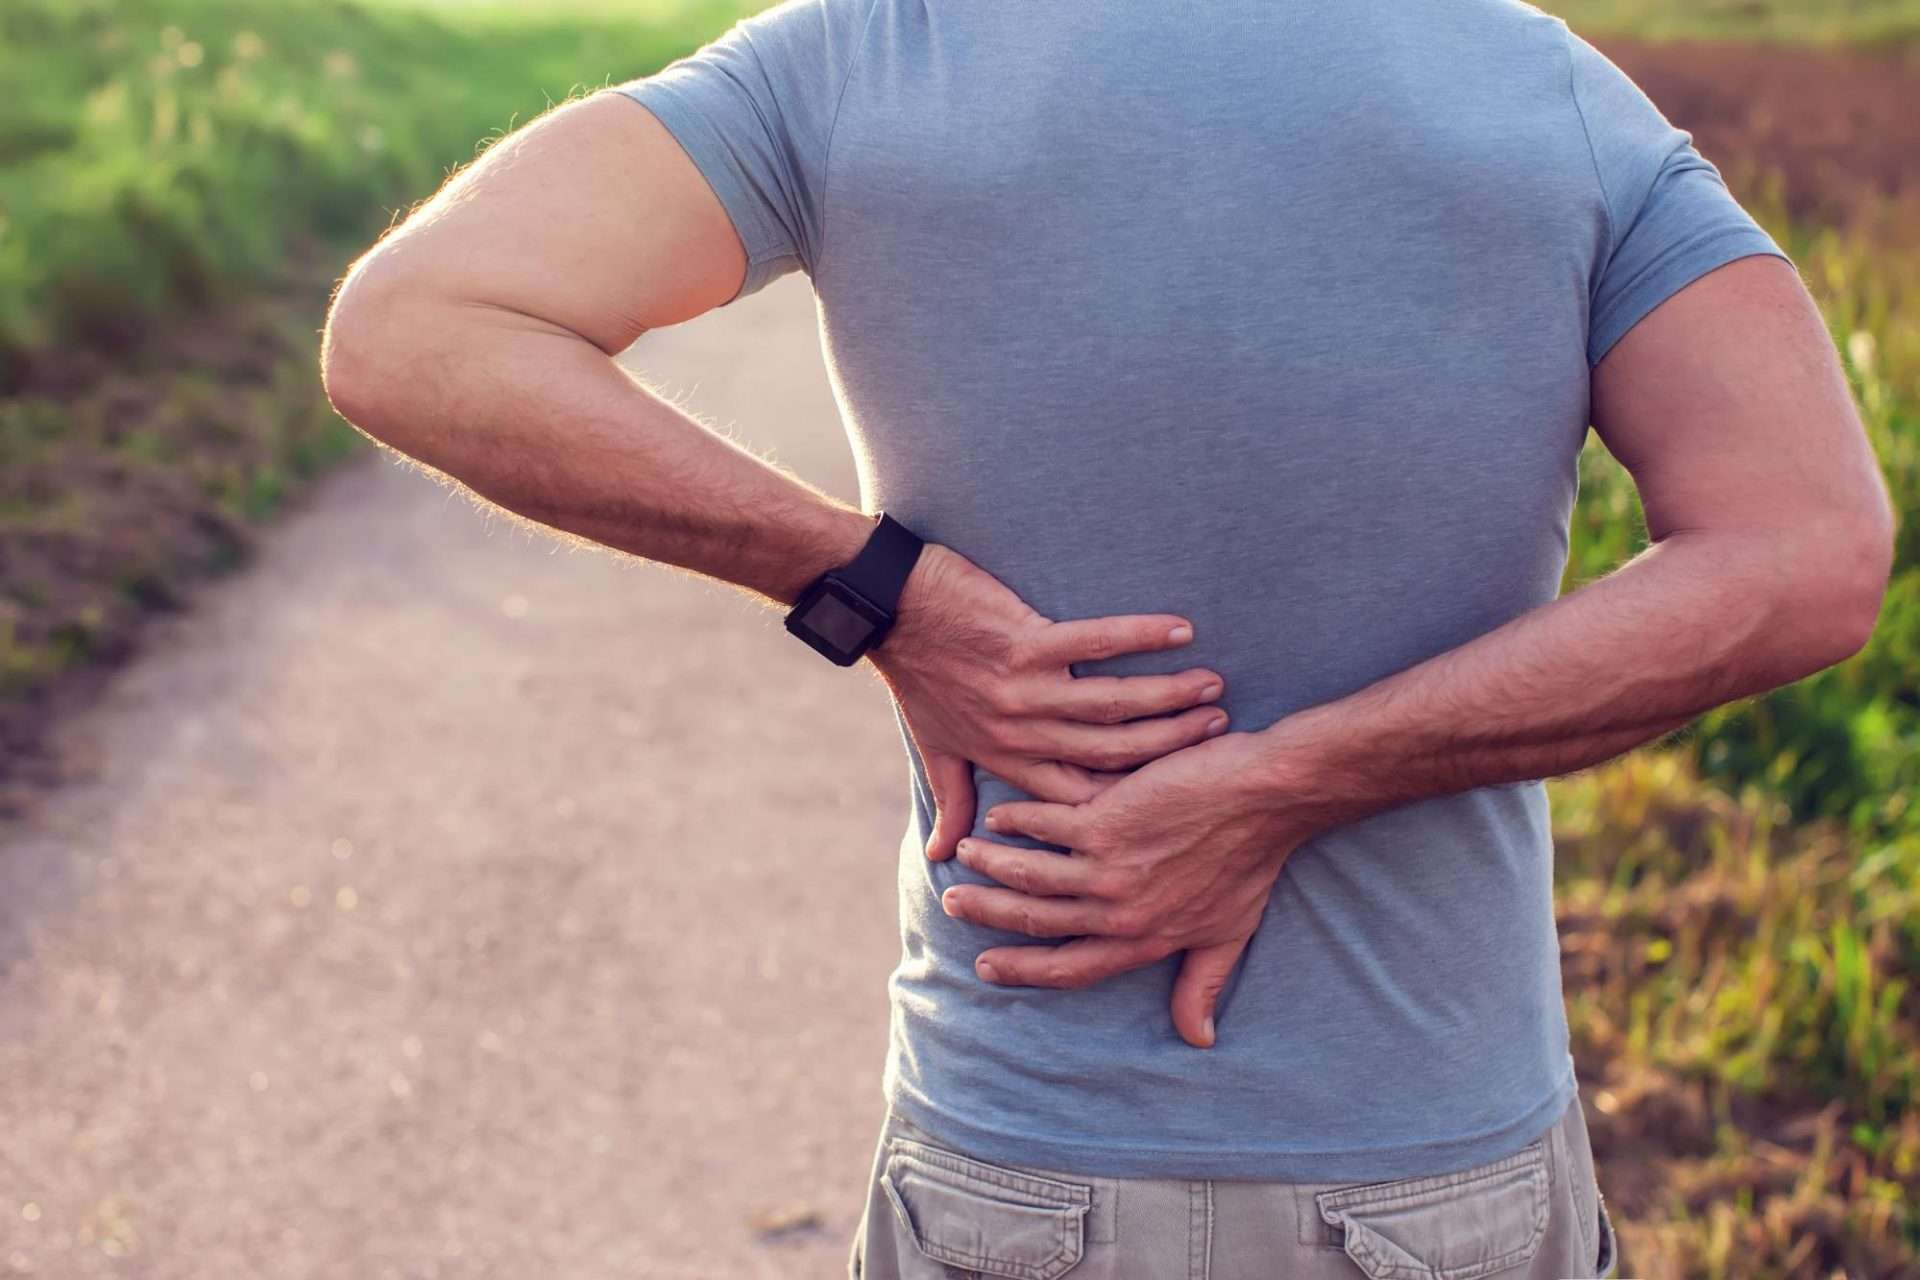 How to Tell if its Kidney Pain or Back Pain